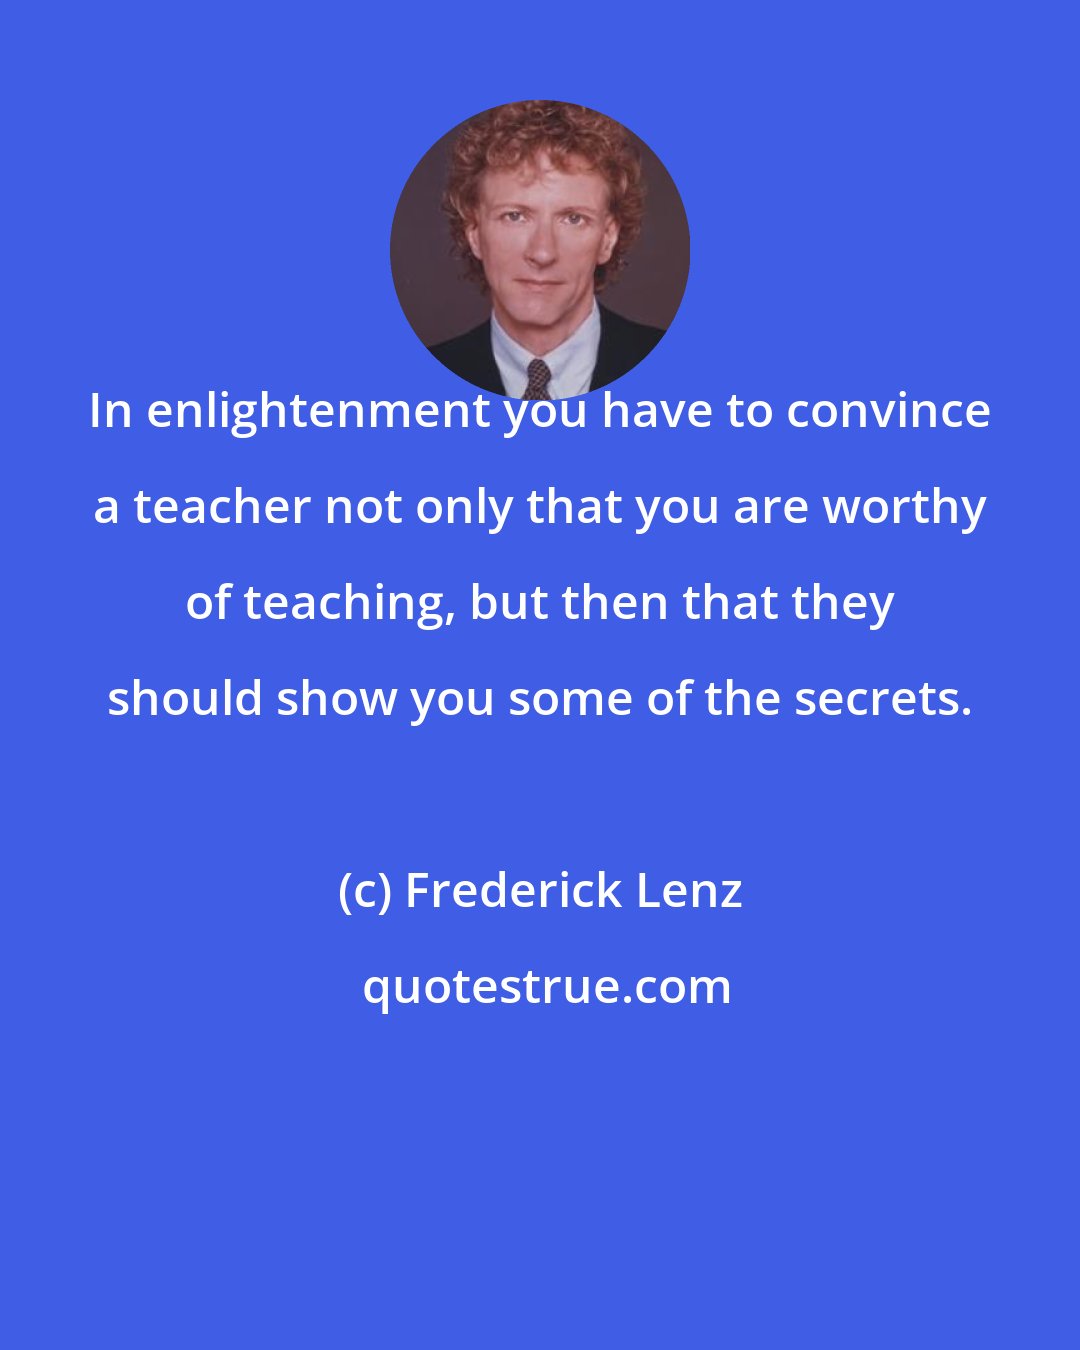 Frederick Lenz: In enlightenment you have to convince a teacher not only that you are worthy of teaching, but then that they should show you some of the secrets.